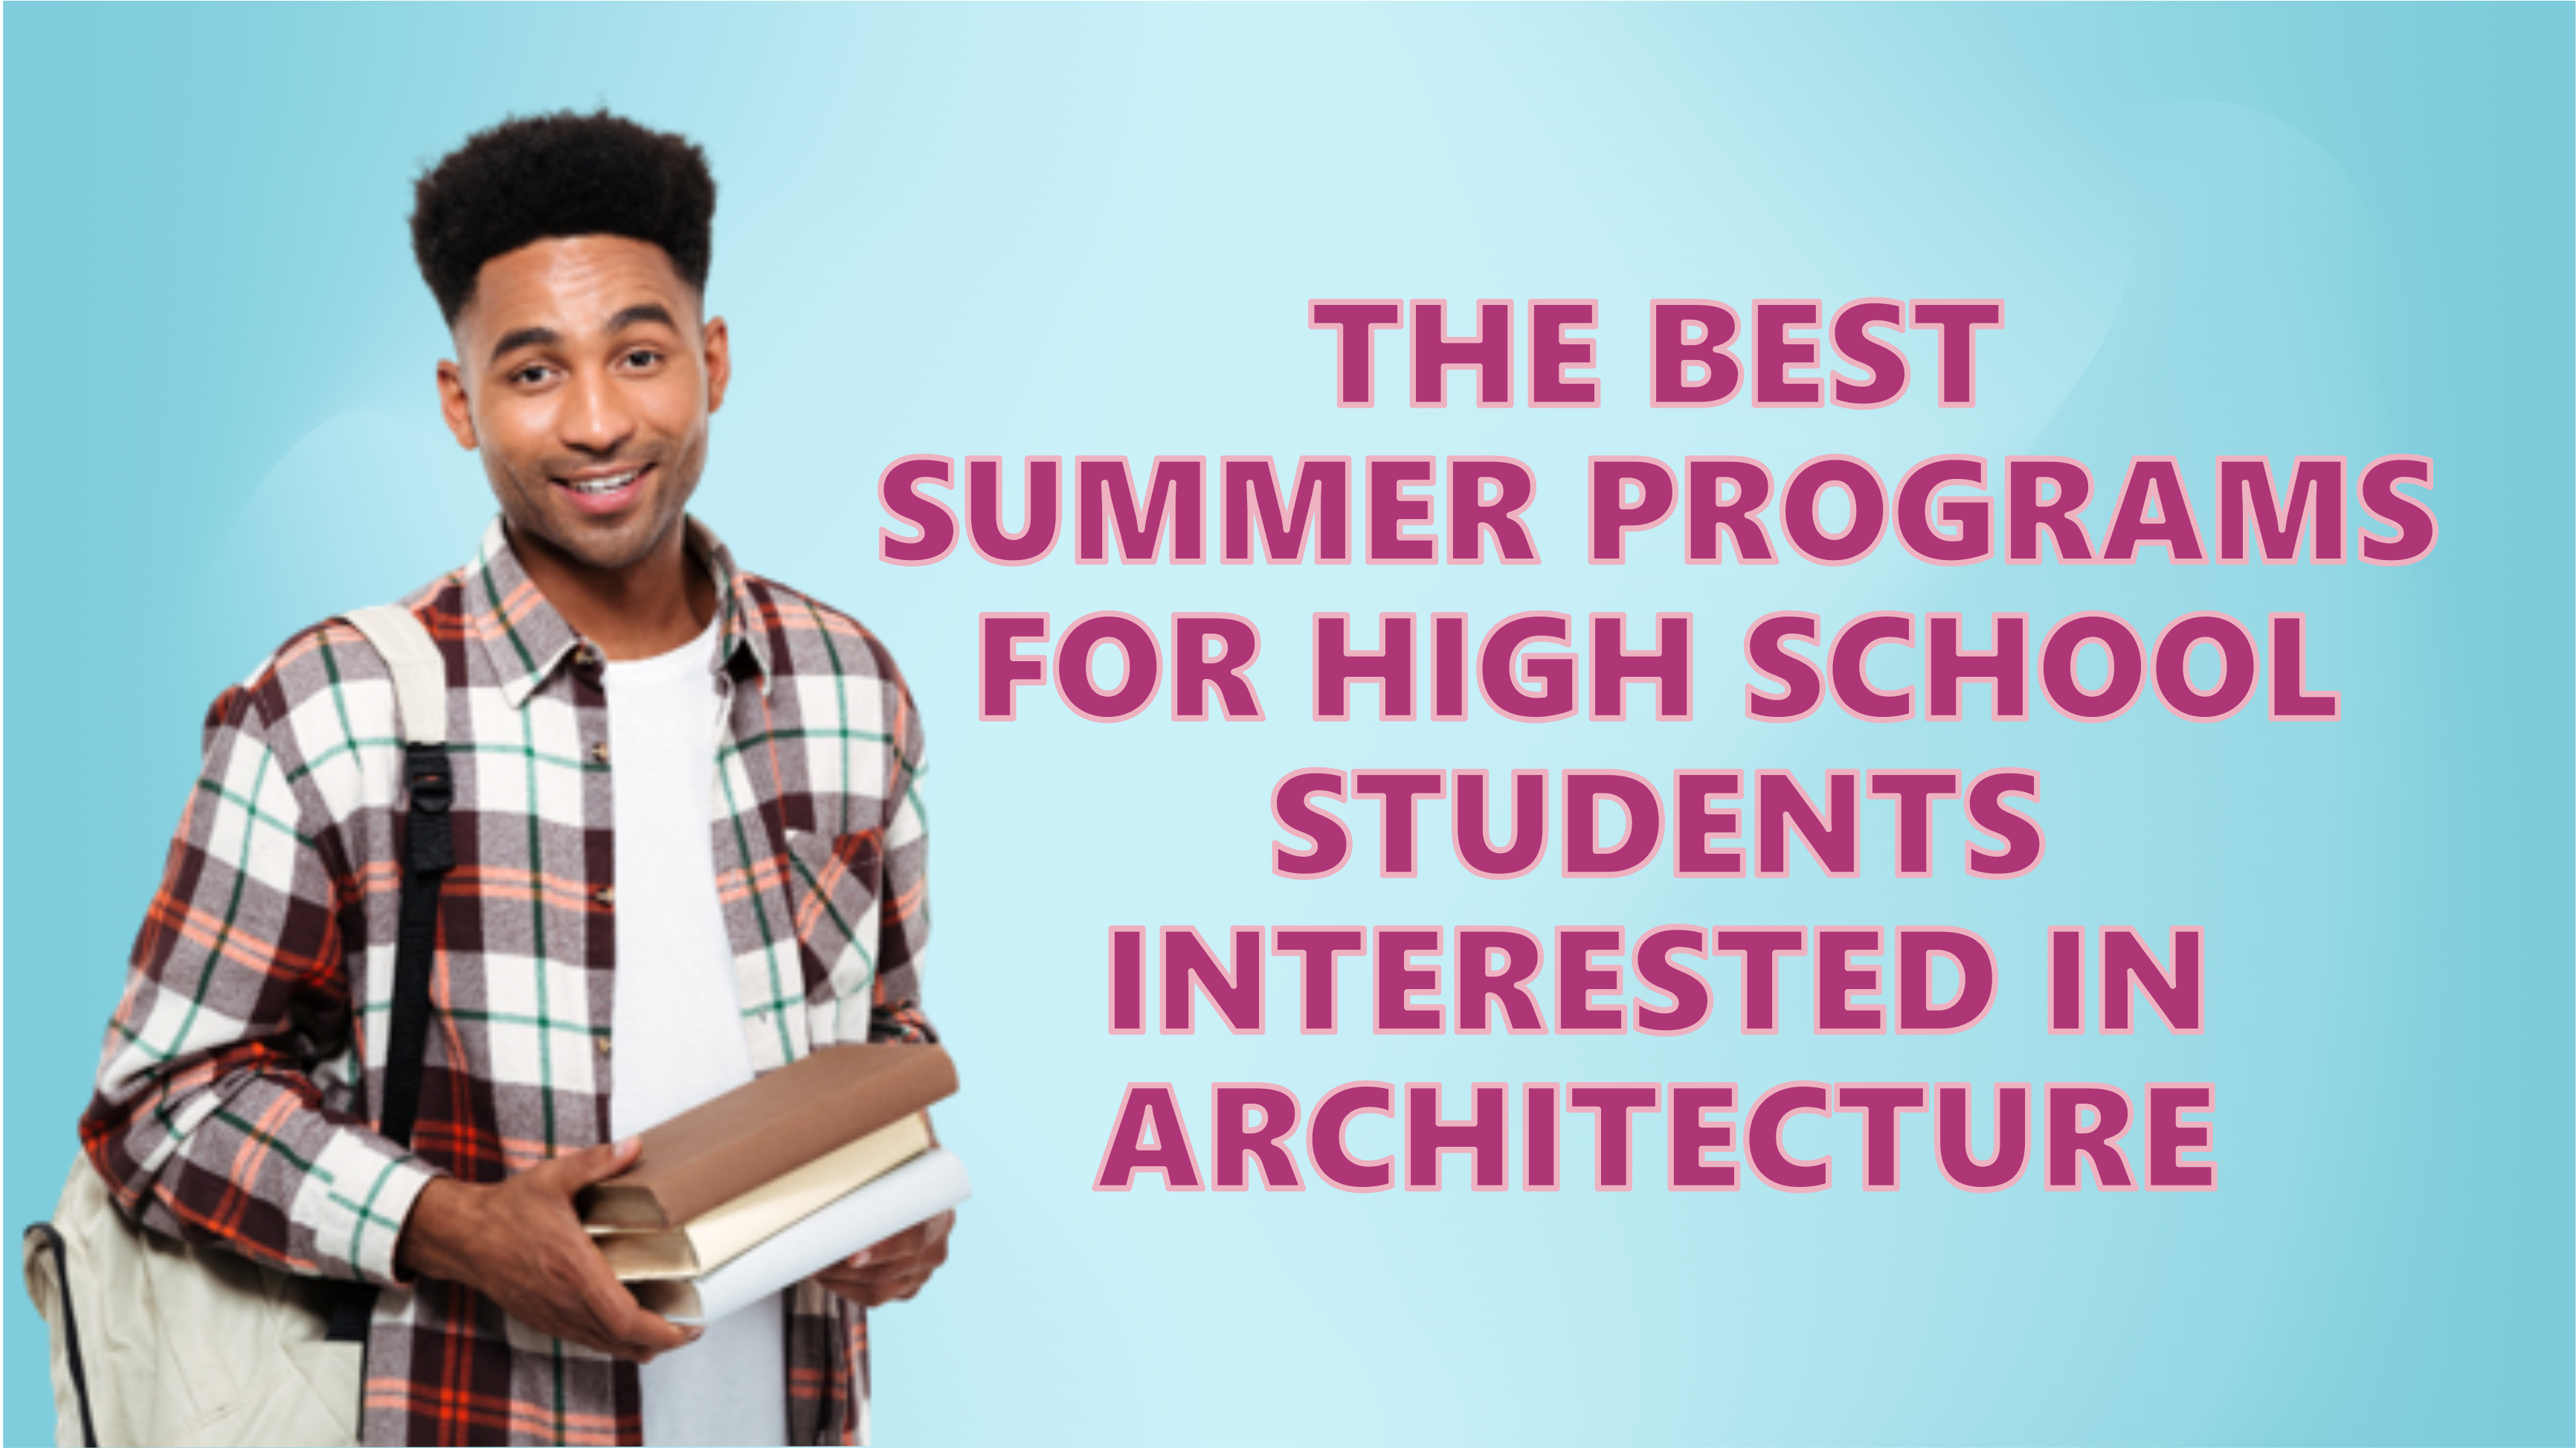 The best summer programs for high school students interested in architecture